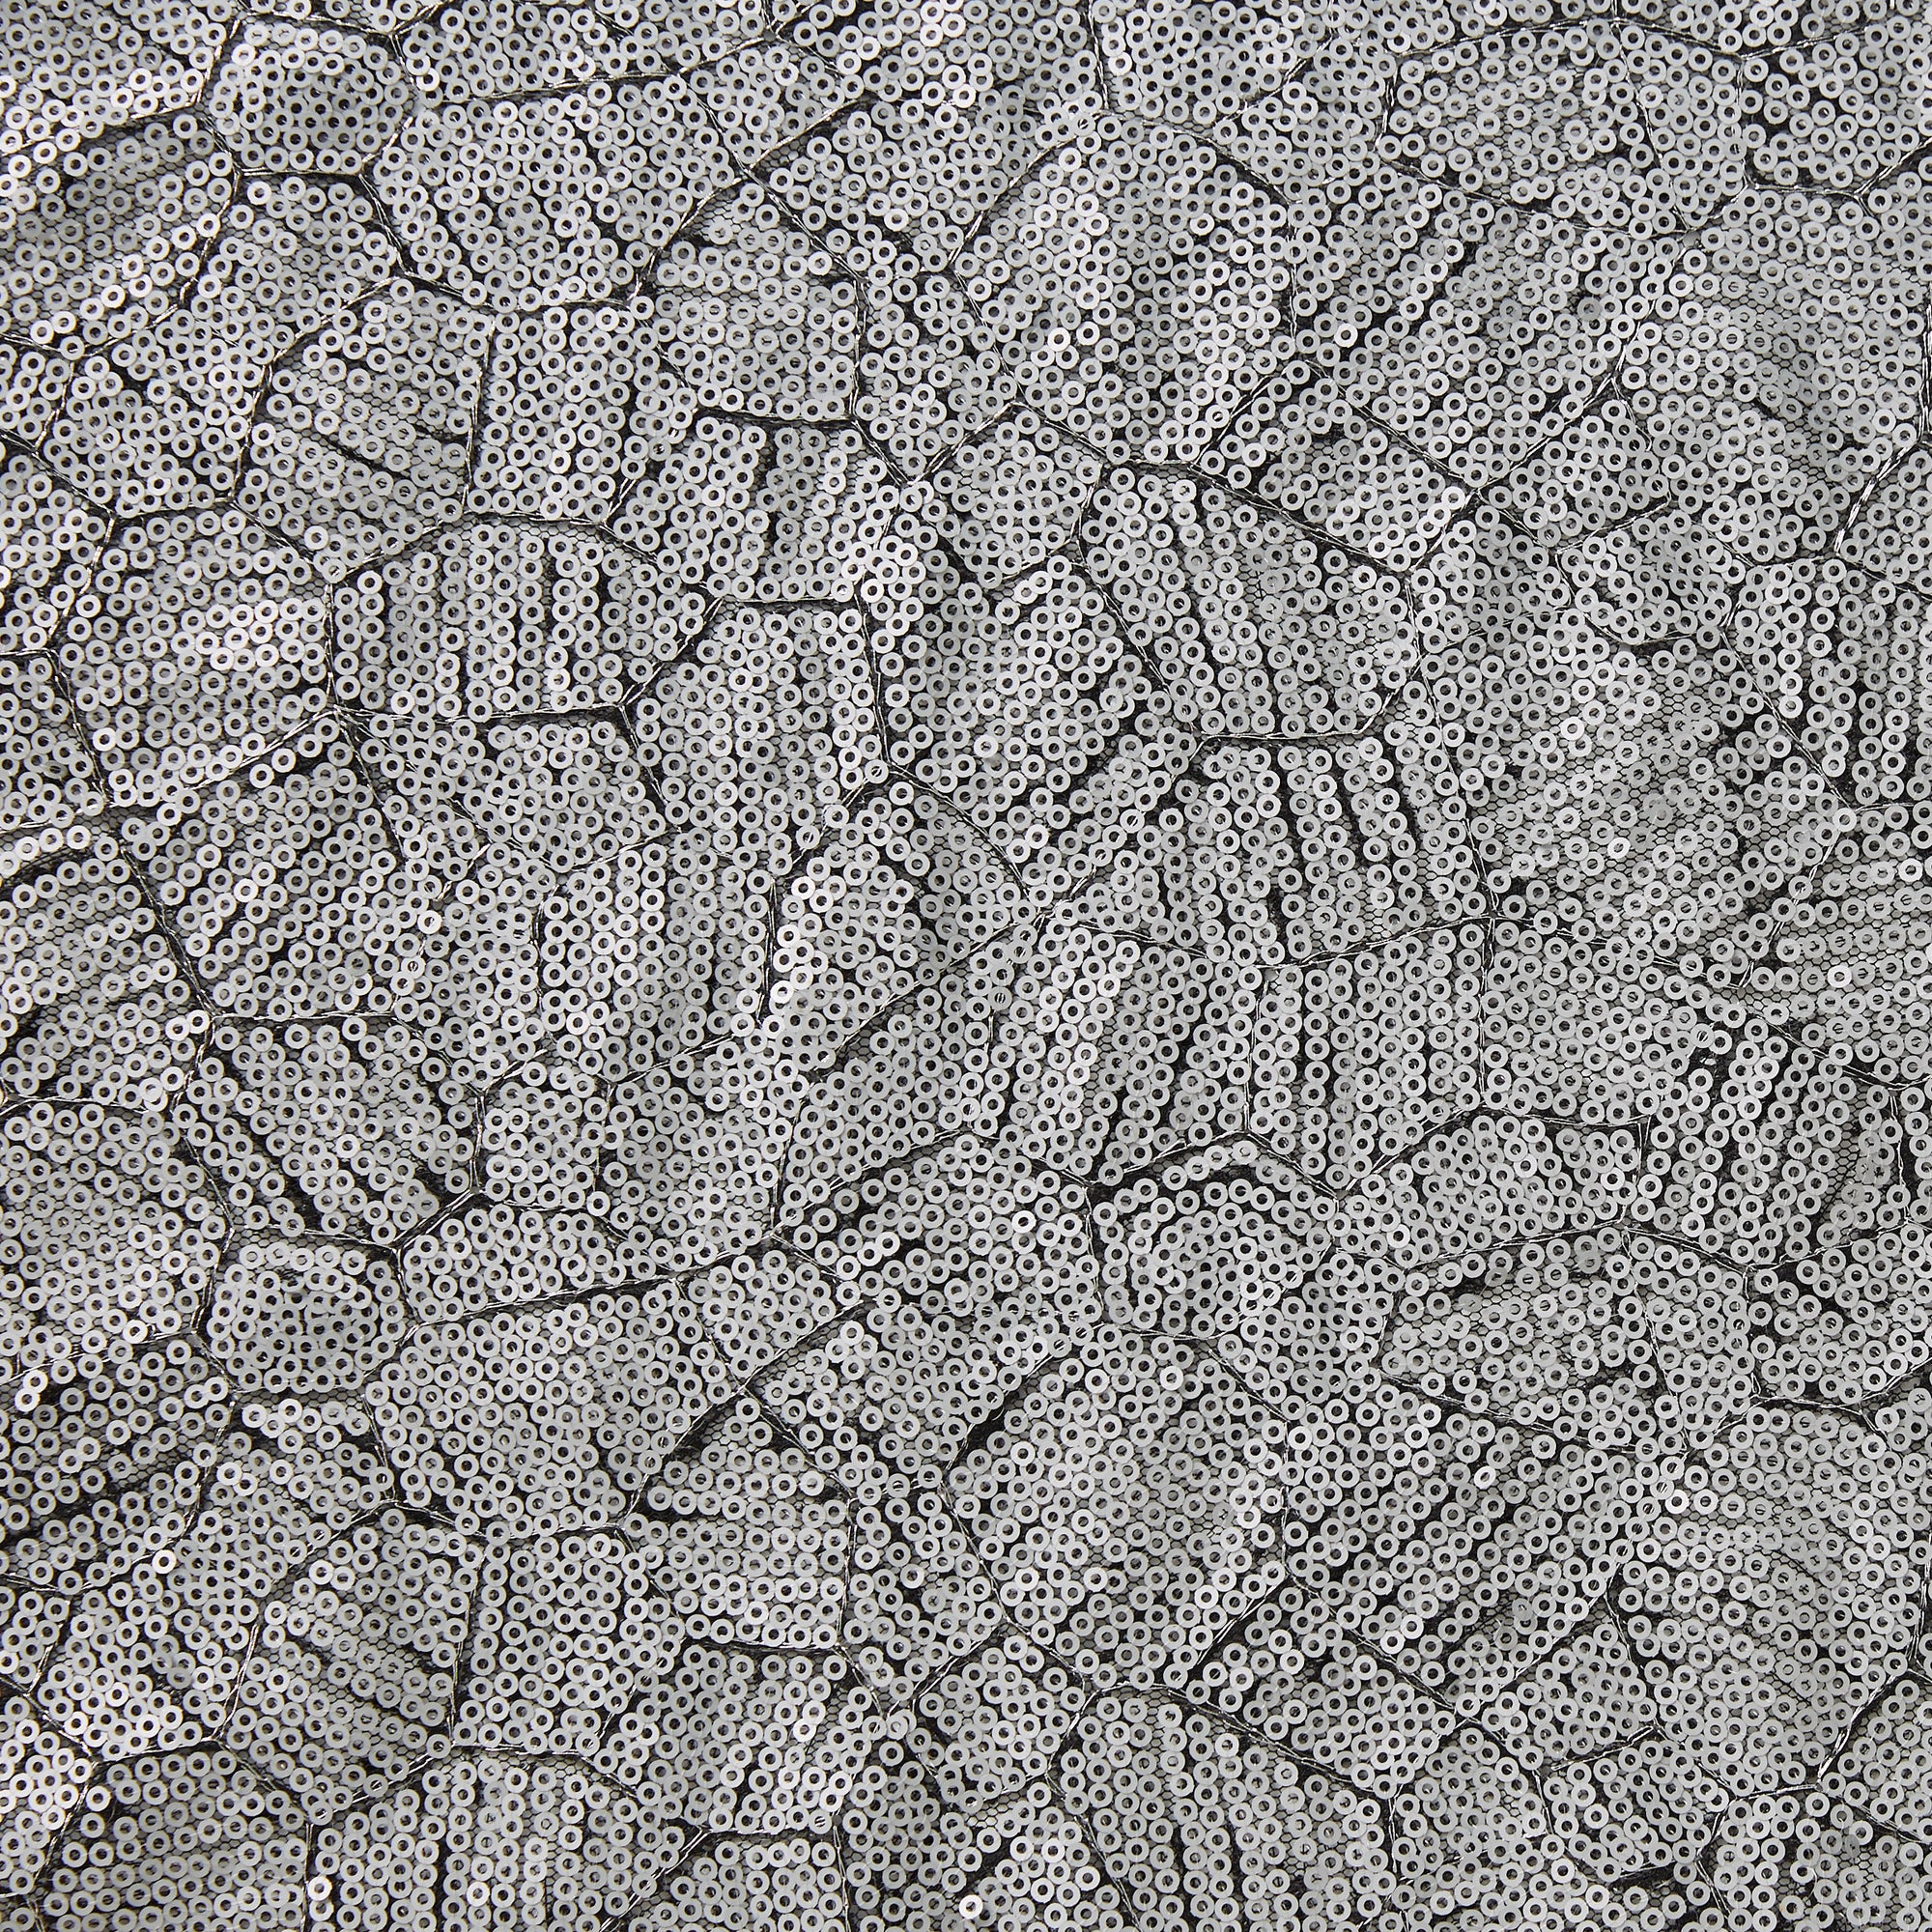 Illustrating Clash which features silver colored sequins in a  abstract design on black pure polyester mesh 